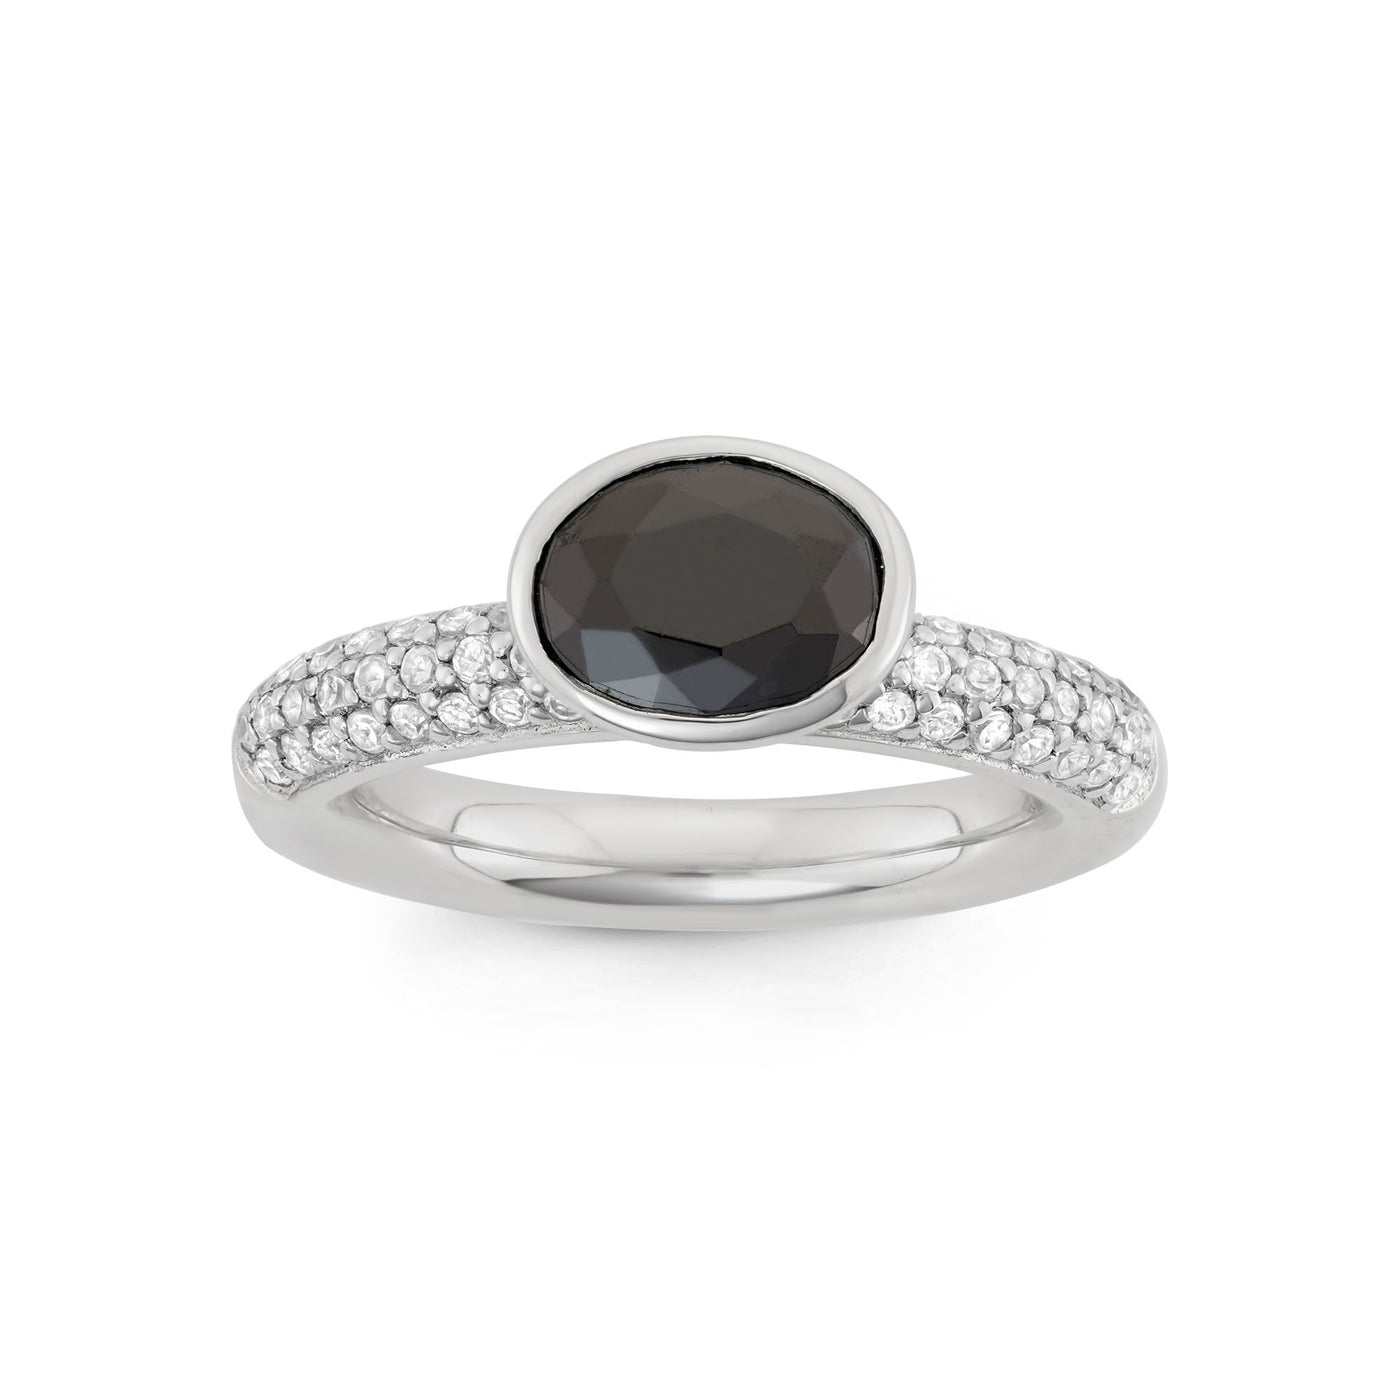 Rebecca Sloane Silver Ring With Pave White CZ and Black CZ